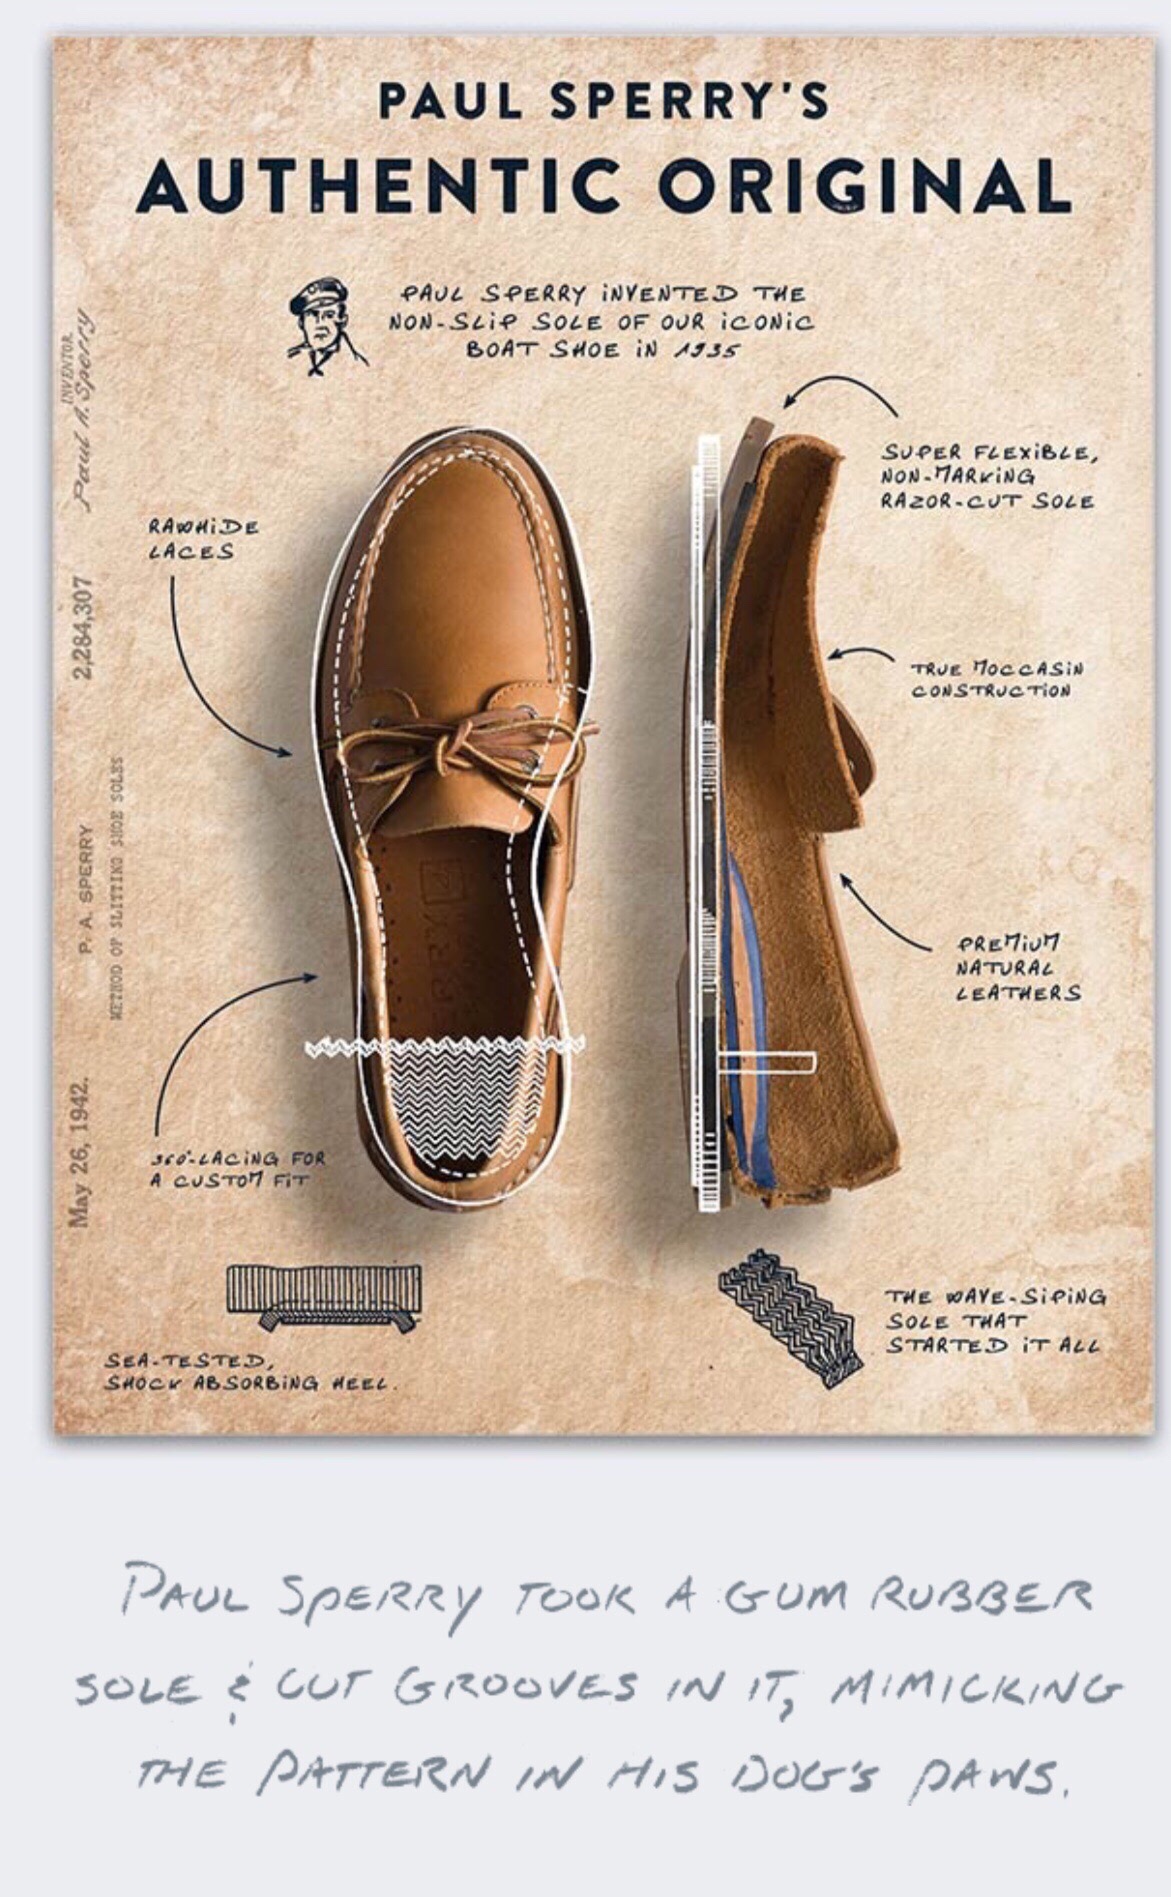 brittany schleicher recommends sperry insole coming out pic